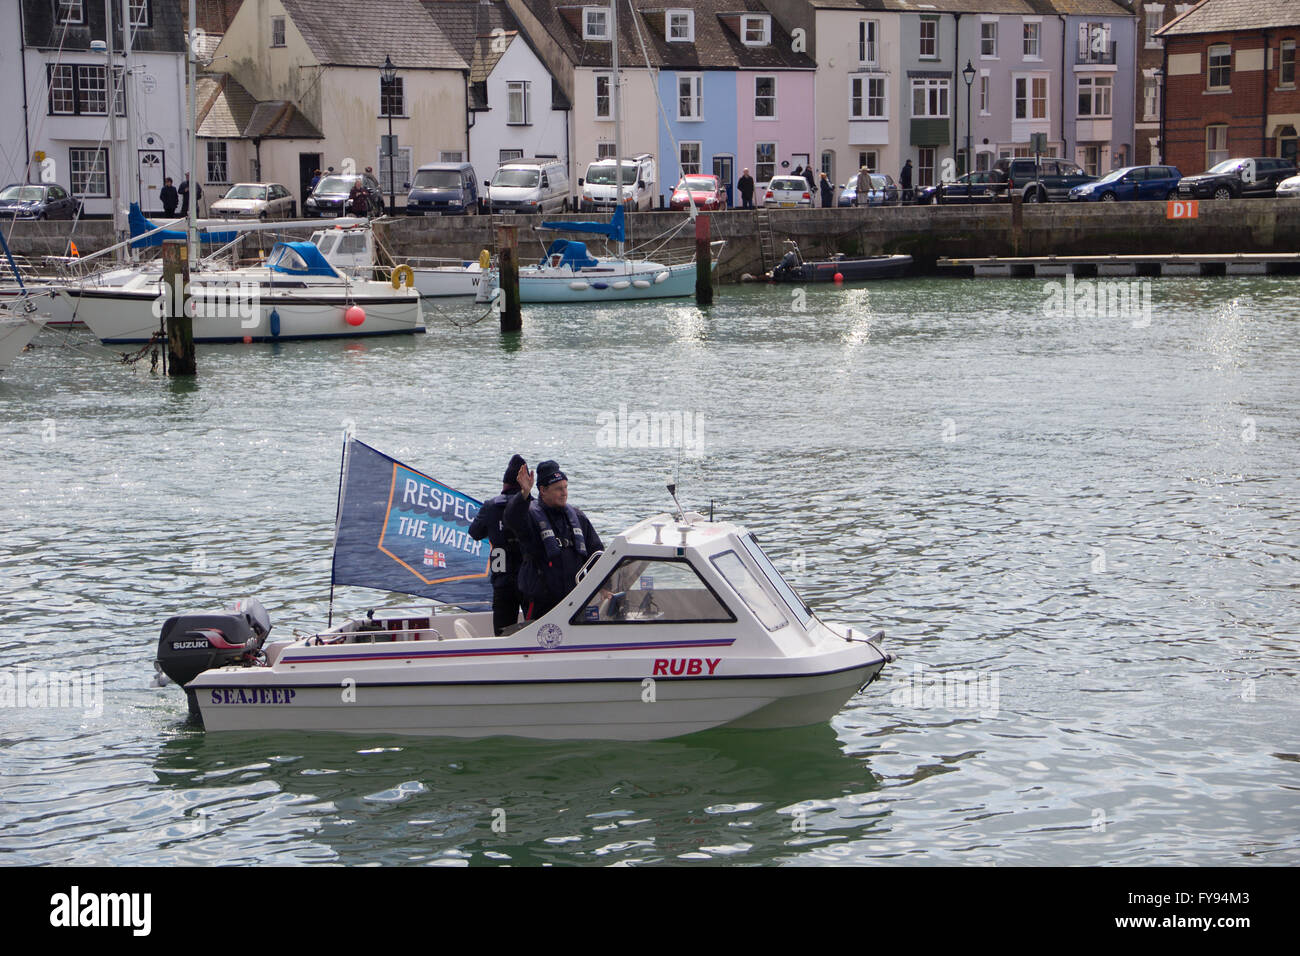 Weymouth, England. 23 April 2016. Queen's 90th Birthday Floating Tribute. Seajeep. Credit:  Frances Underwood/Alamy Live News Stock Photo